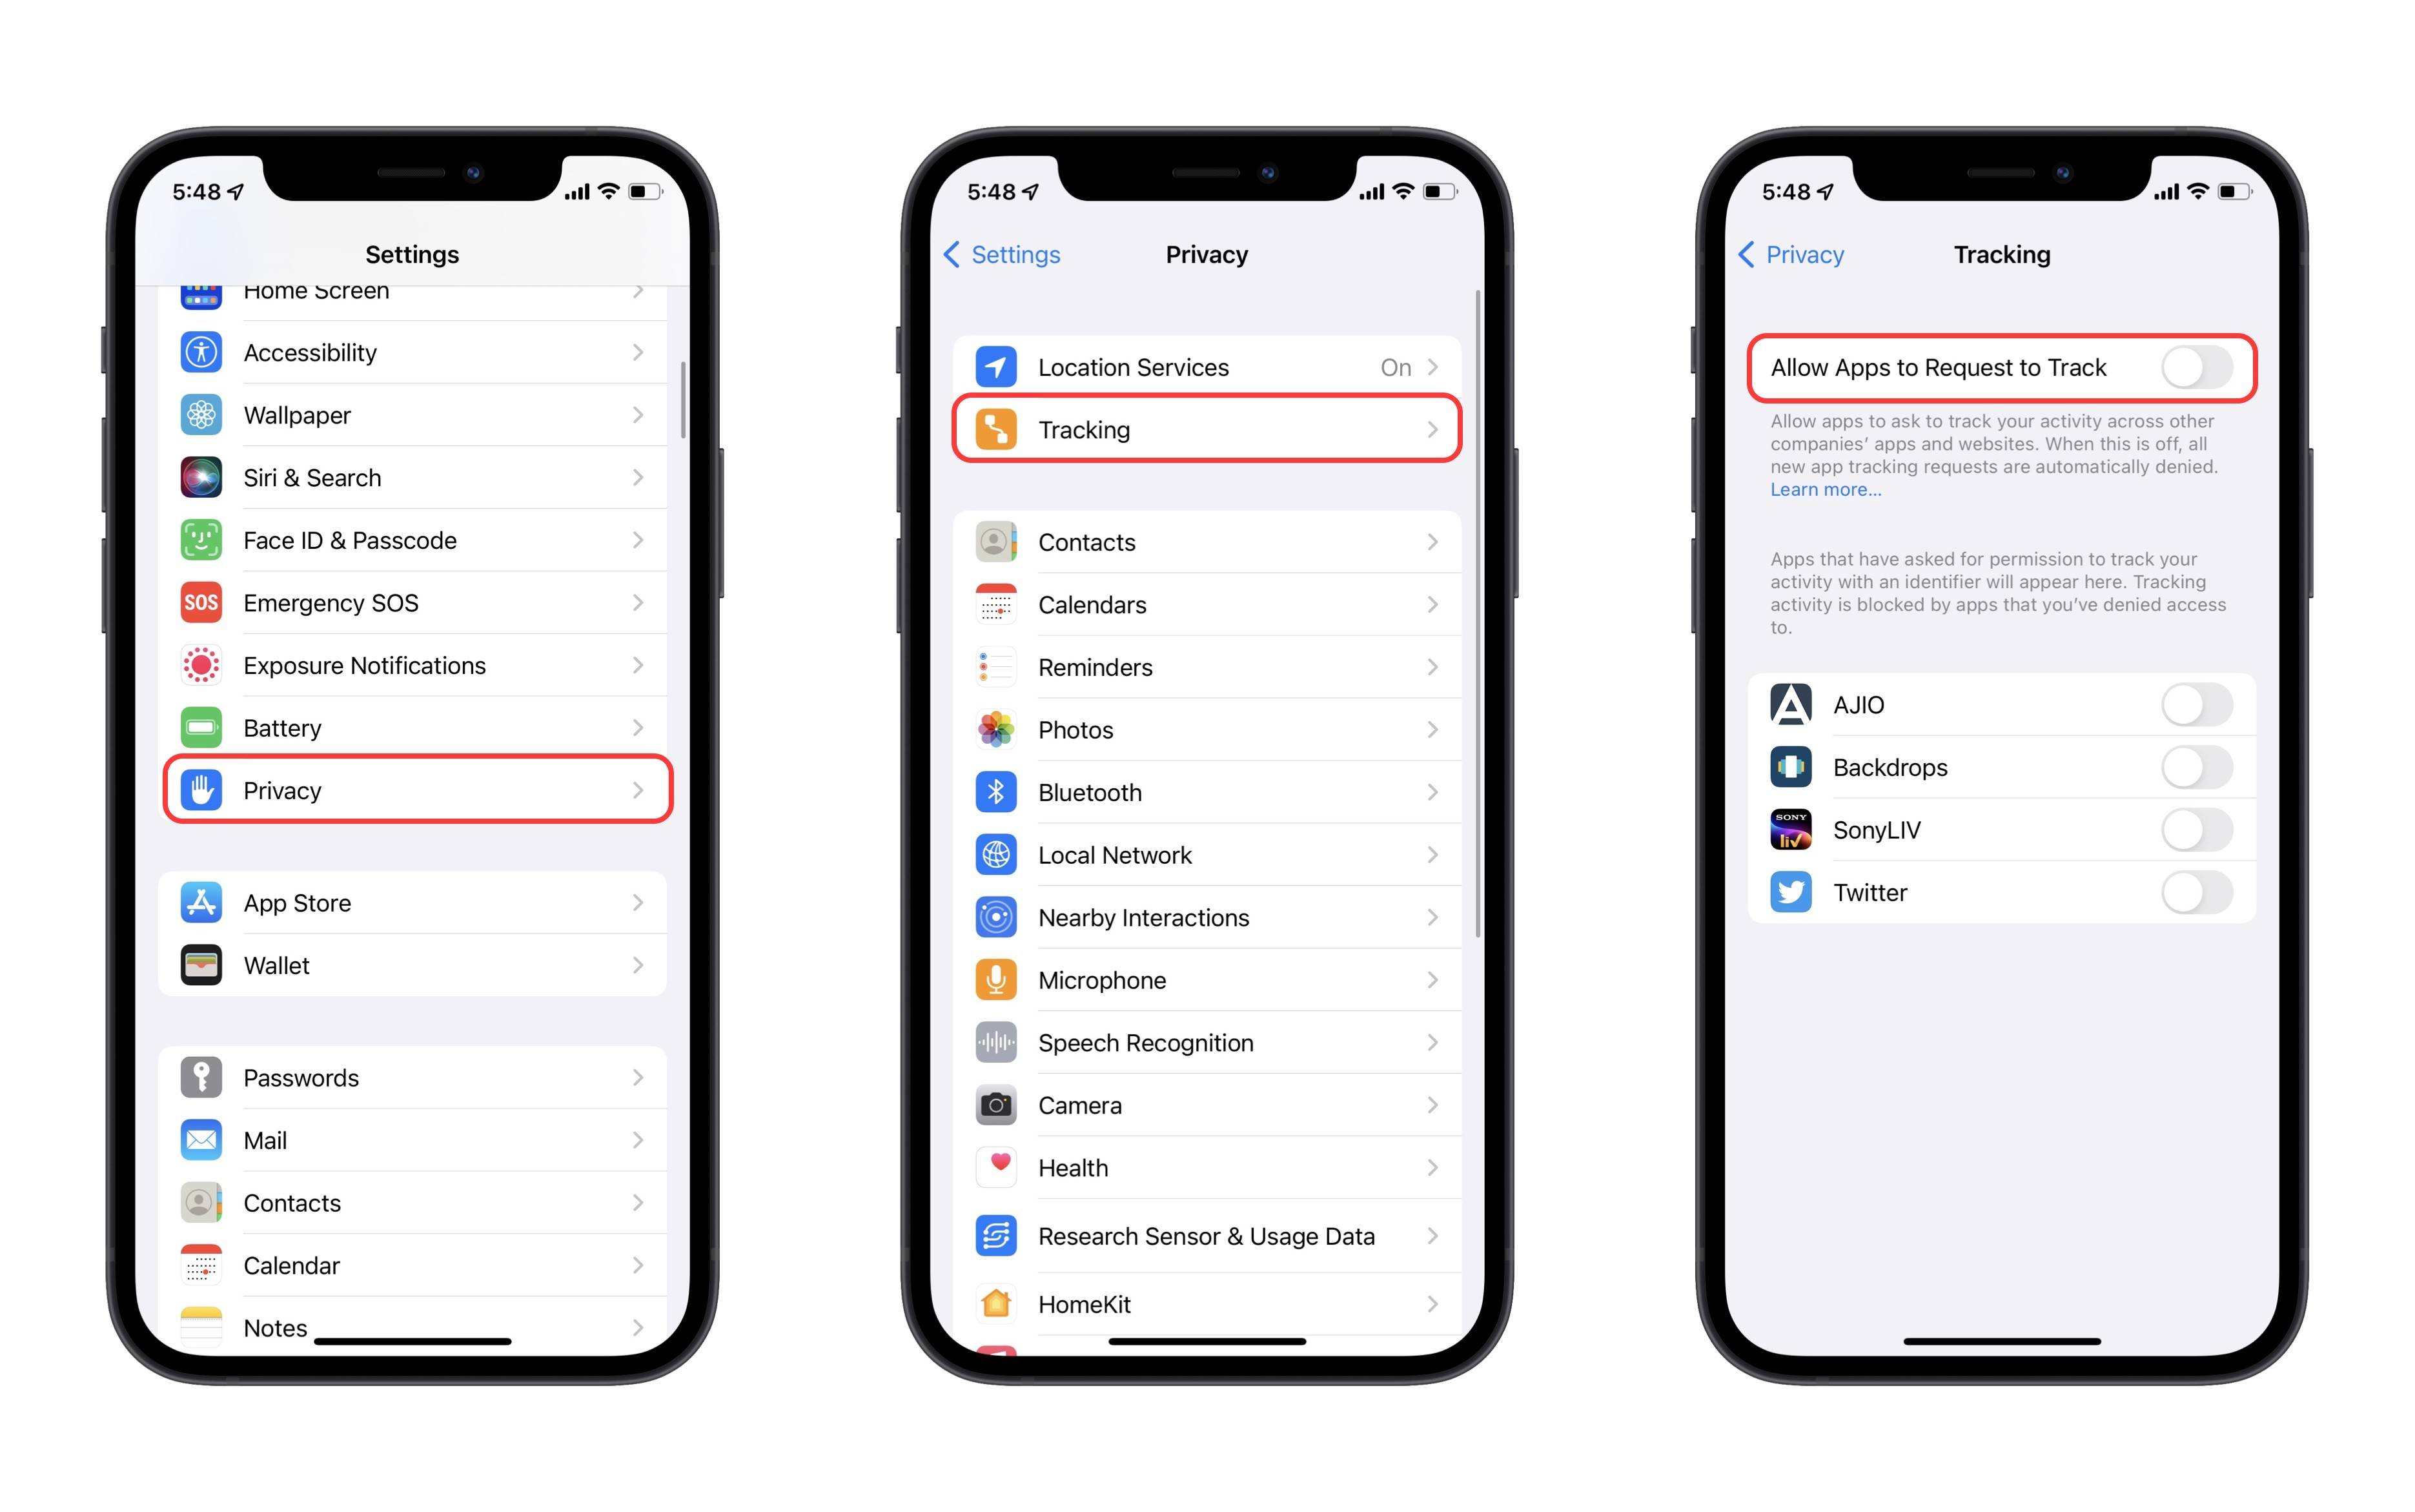 How to disable tracking iphone app